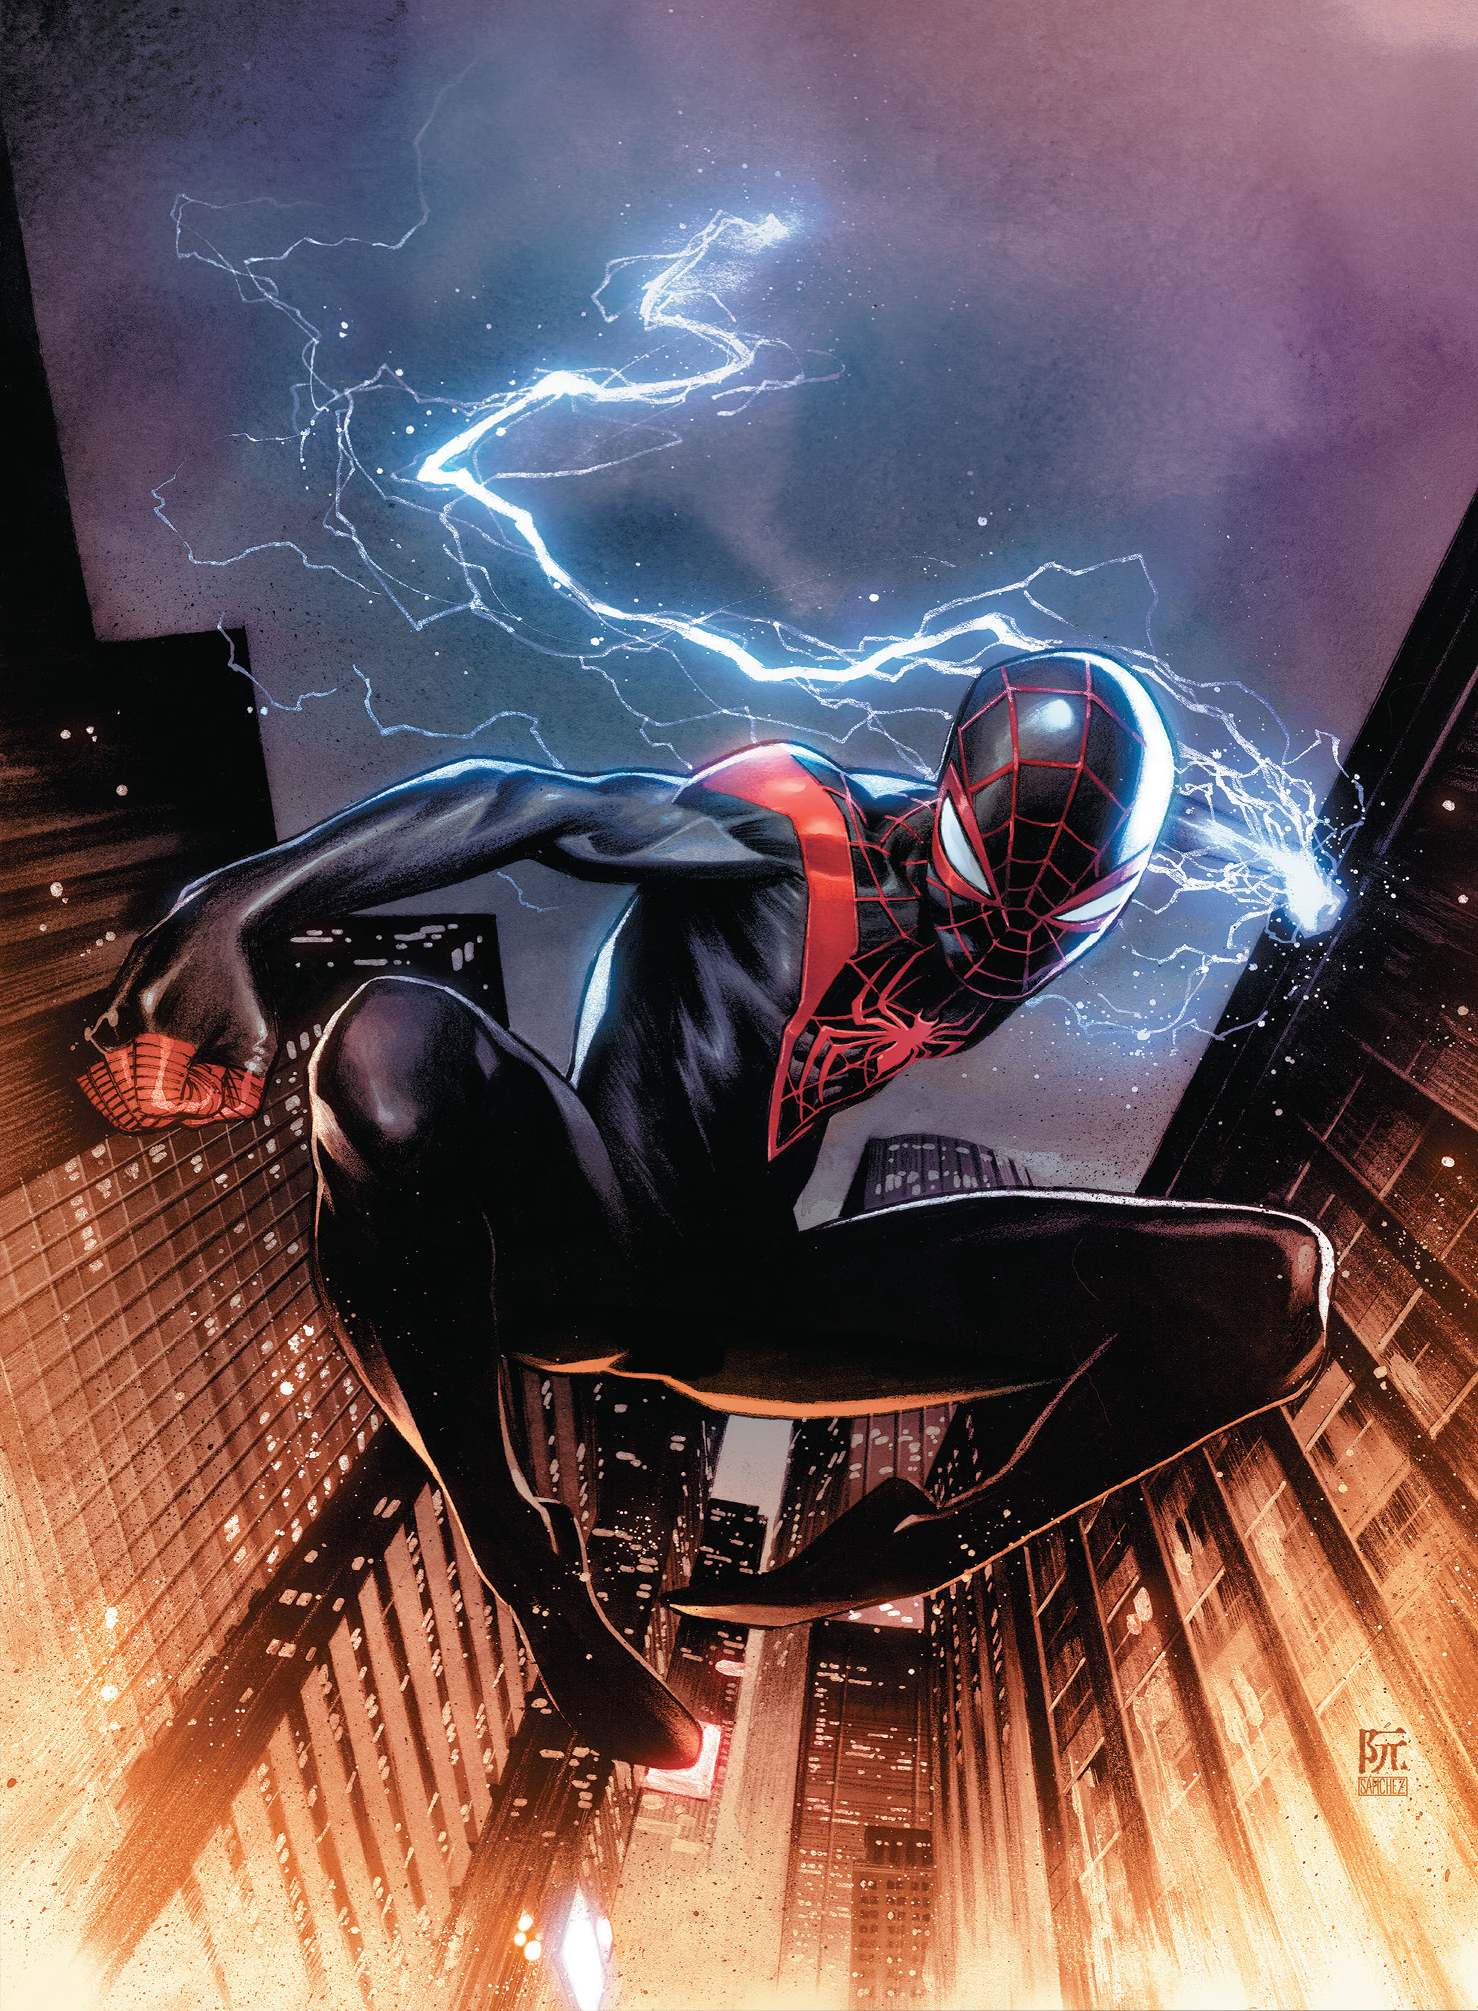 Yes, a Live-Action Miles Morales 'Spider-Man' Movie Is Finally in the Works